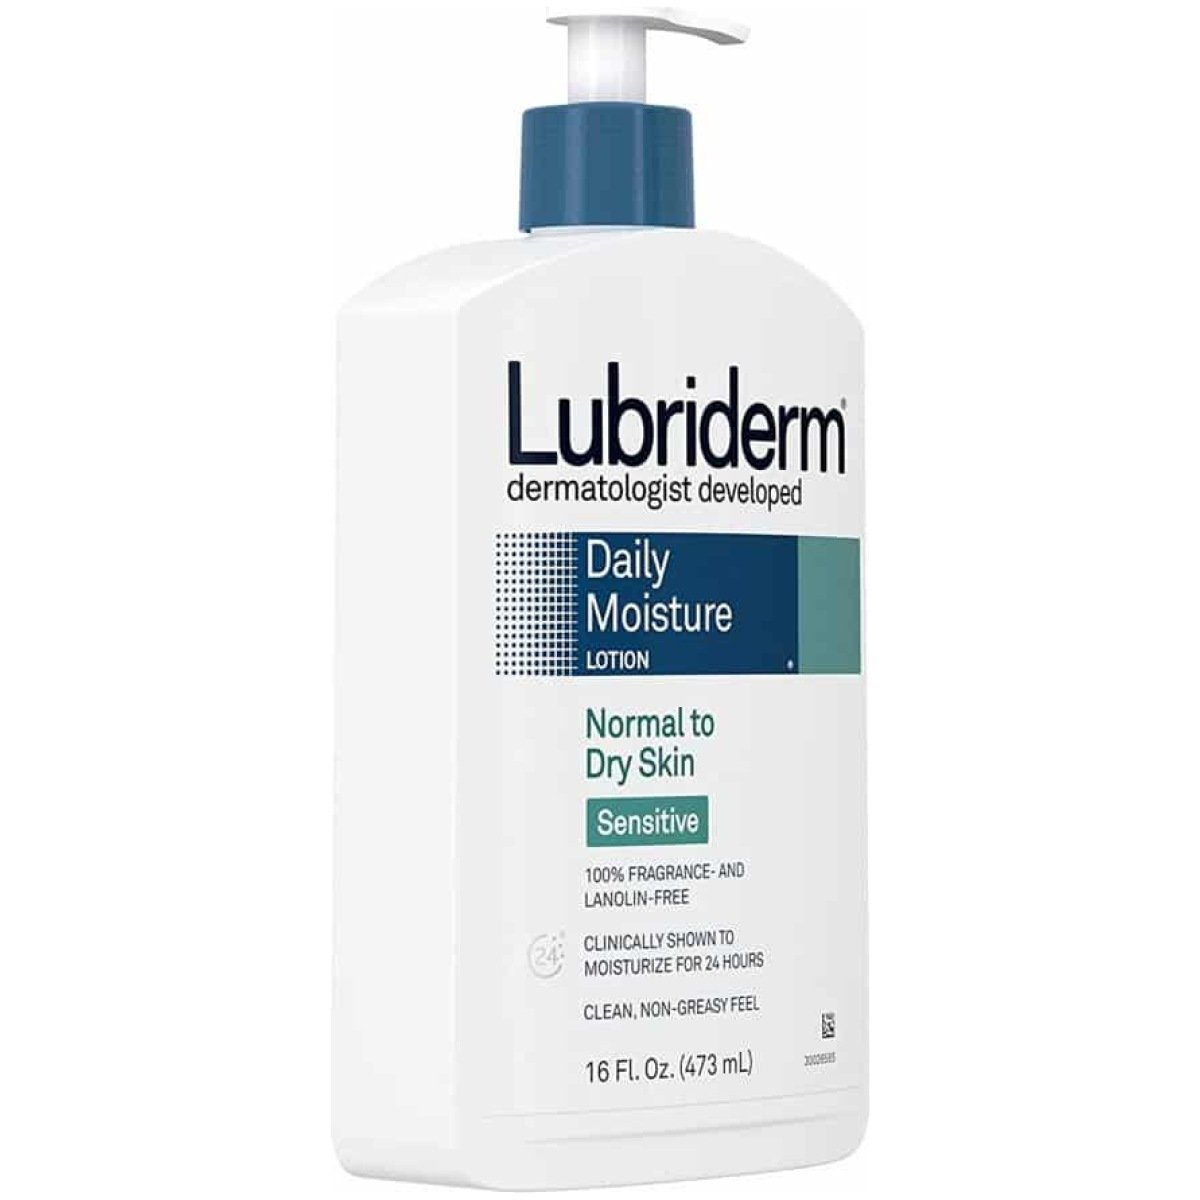 Lubriderm Daily Moisture Lotion Sensitive Normal to Dry Skin 473ml